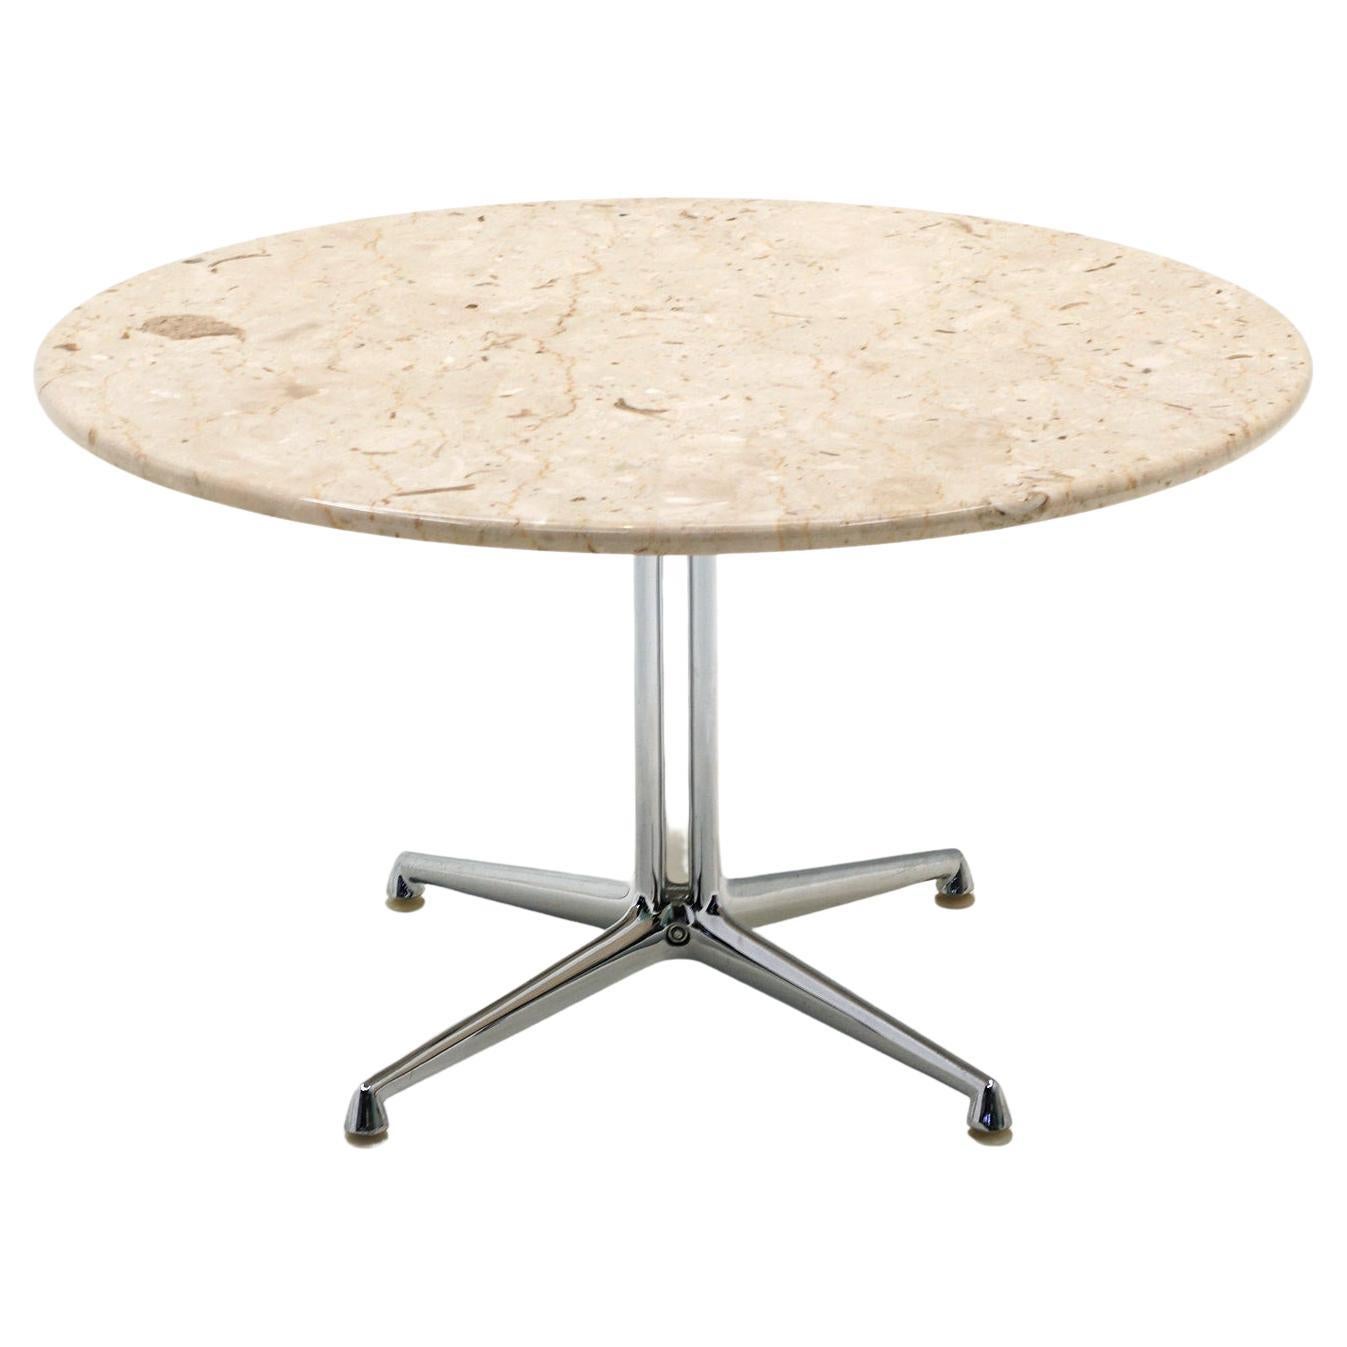 La Fonda Tables by Charles & Ray Eames, Travertine, Chrome, Signed For Sale